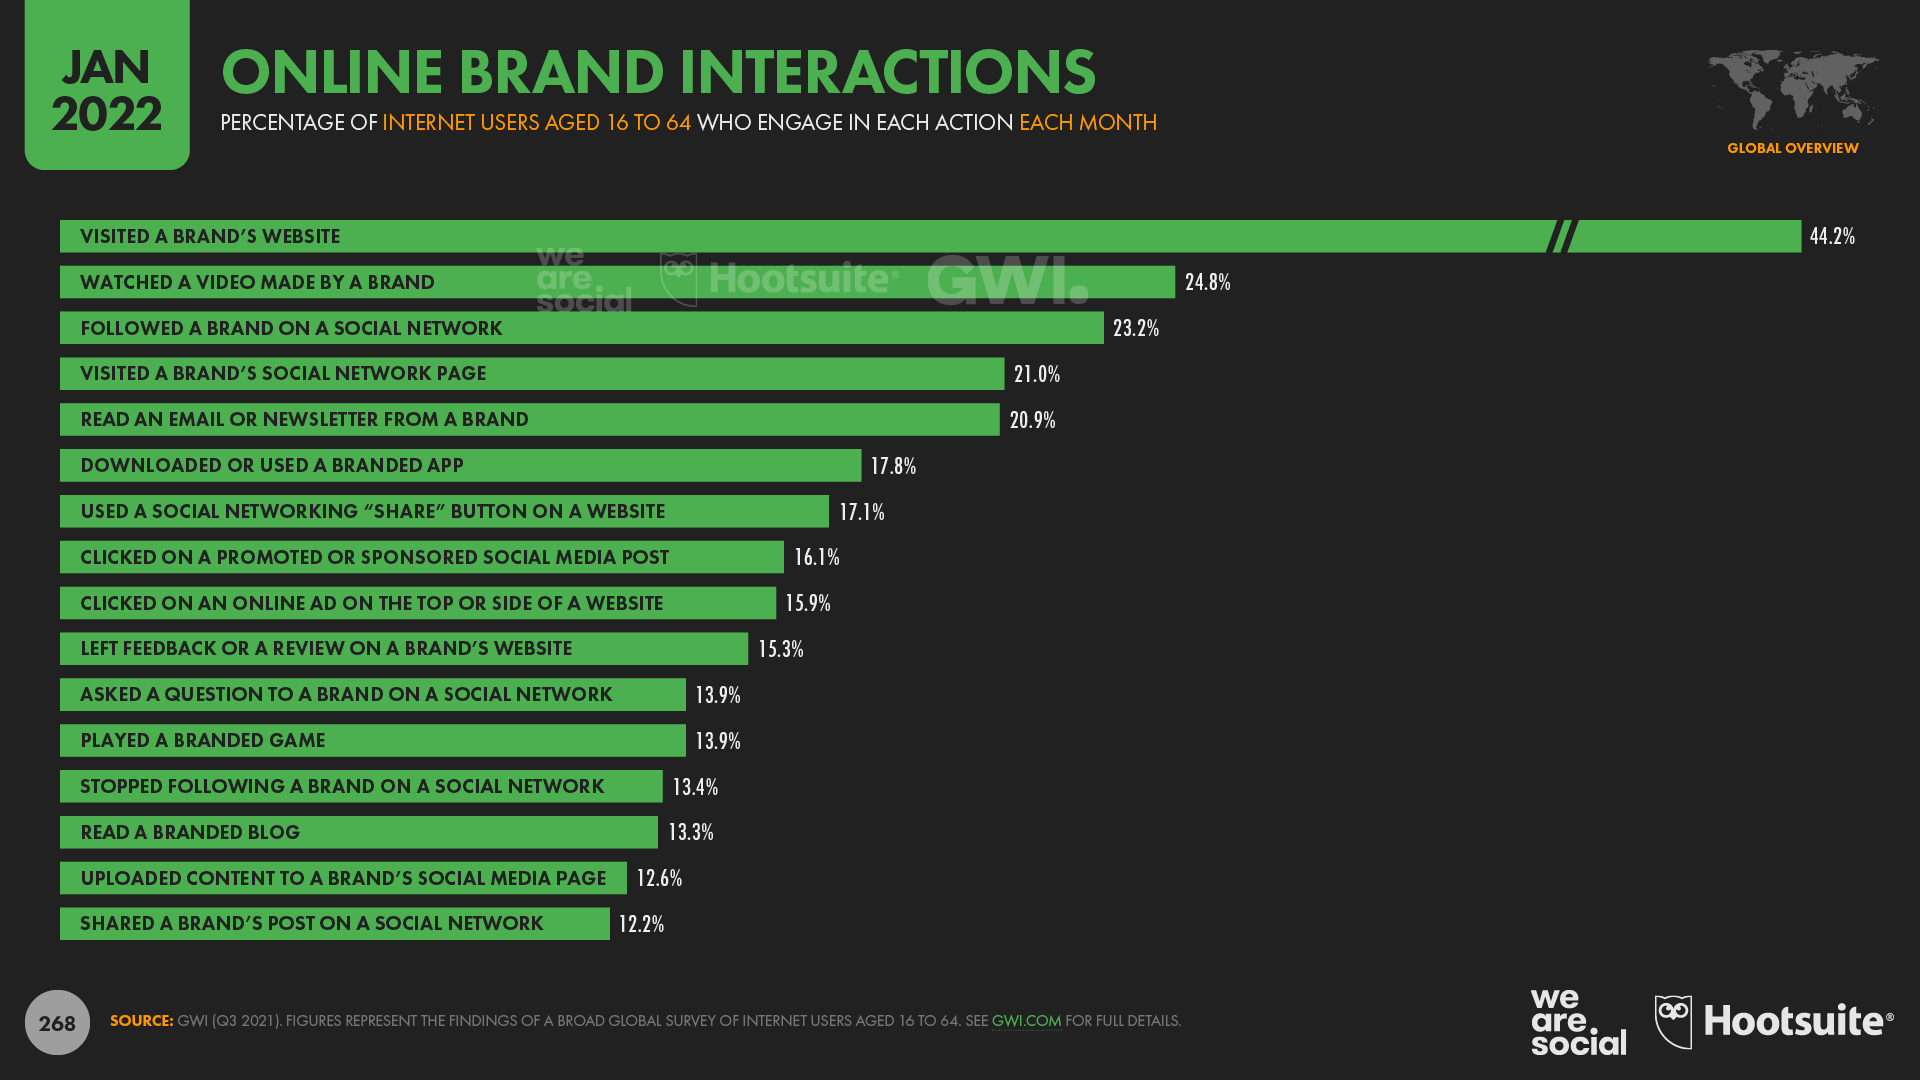 chart showing online brand interactions